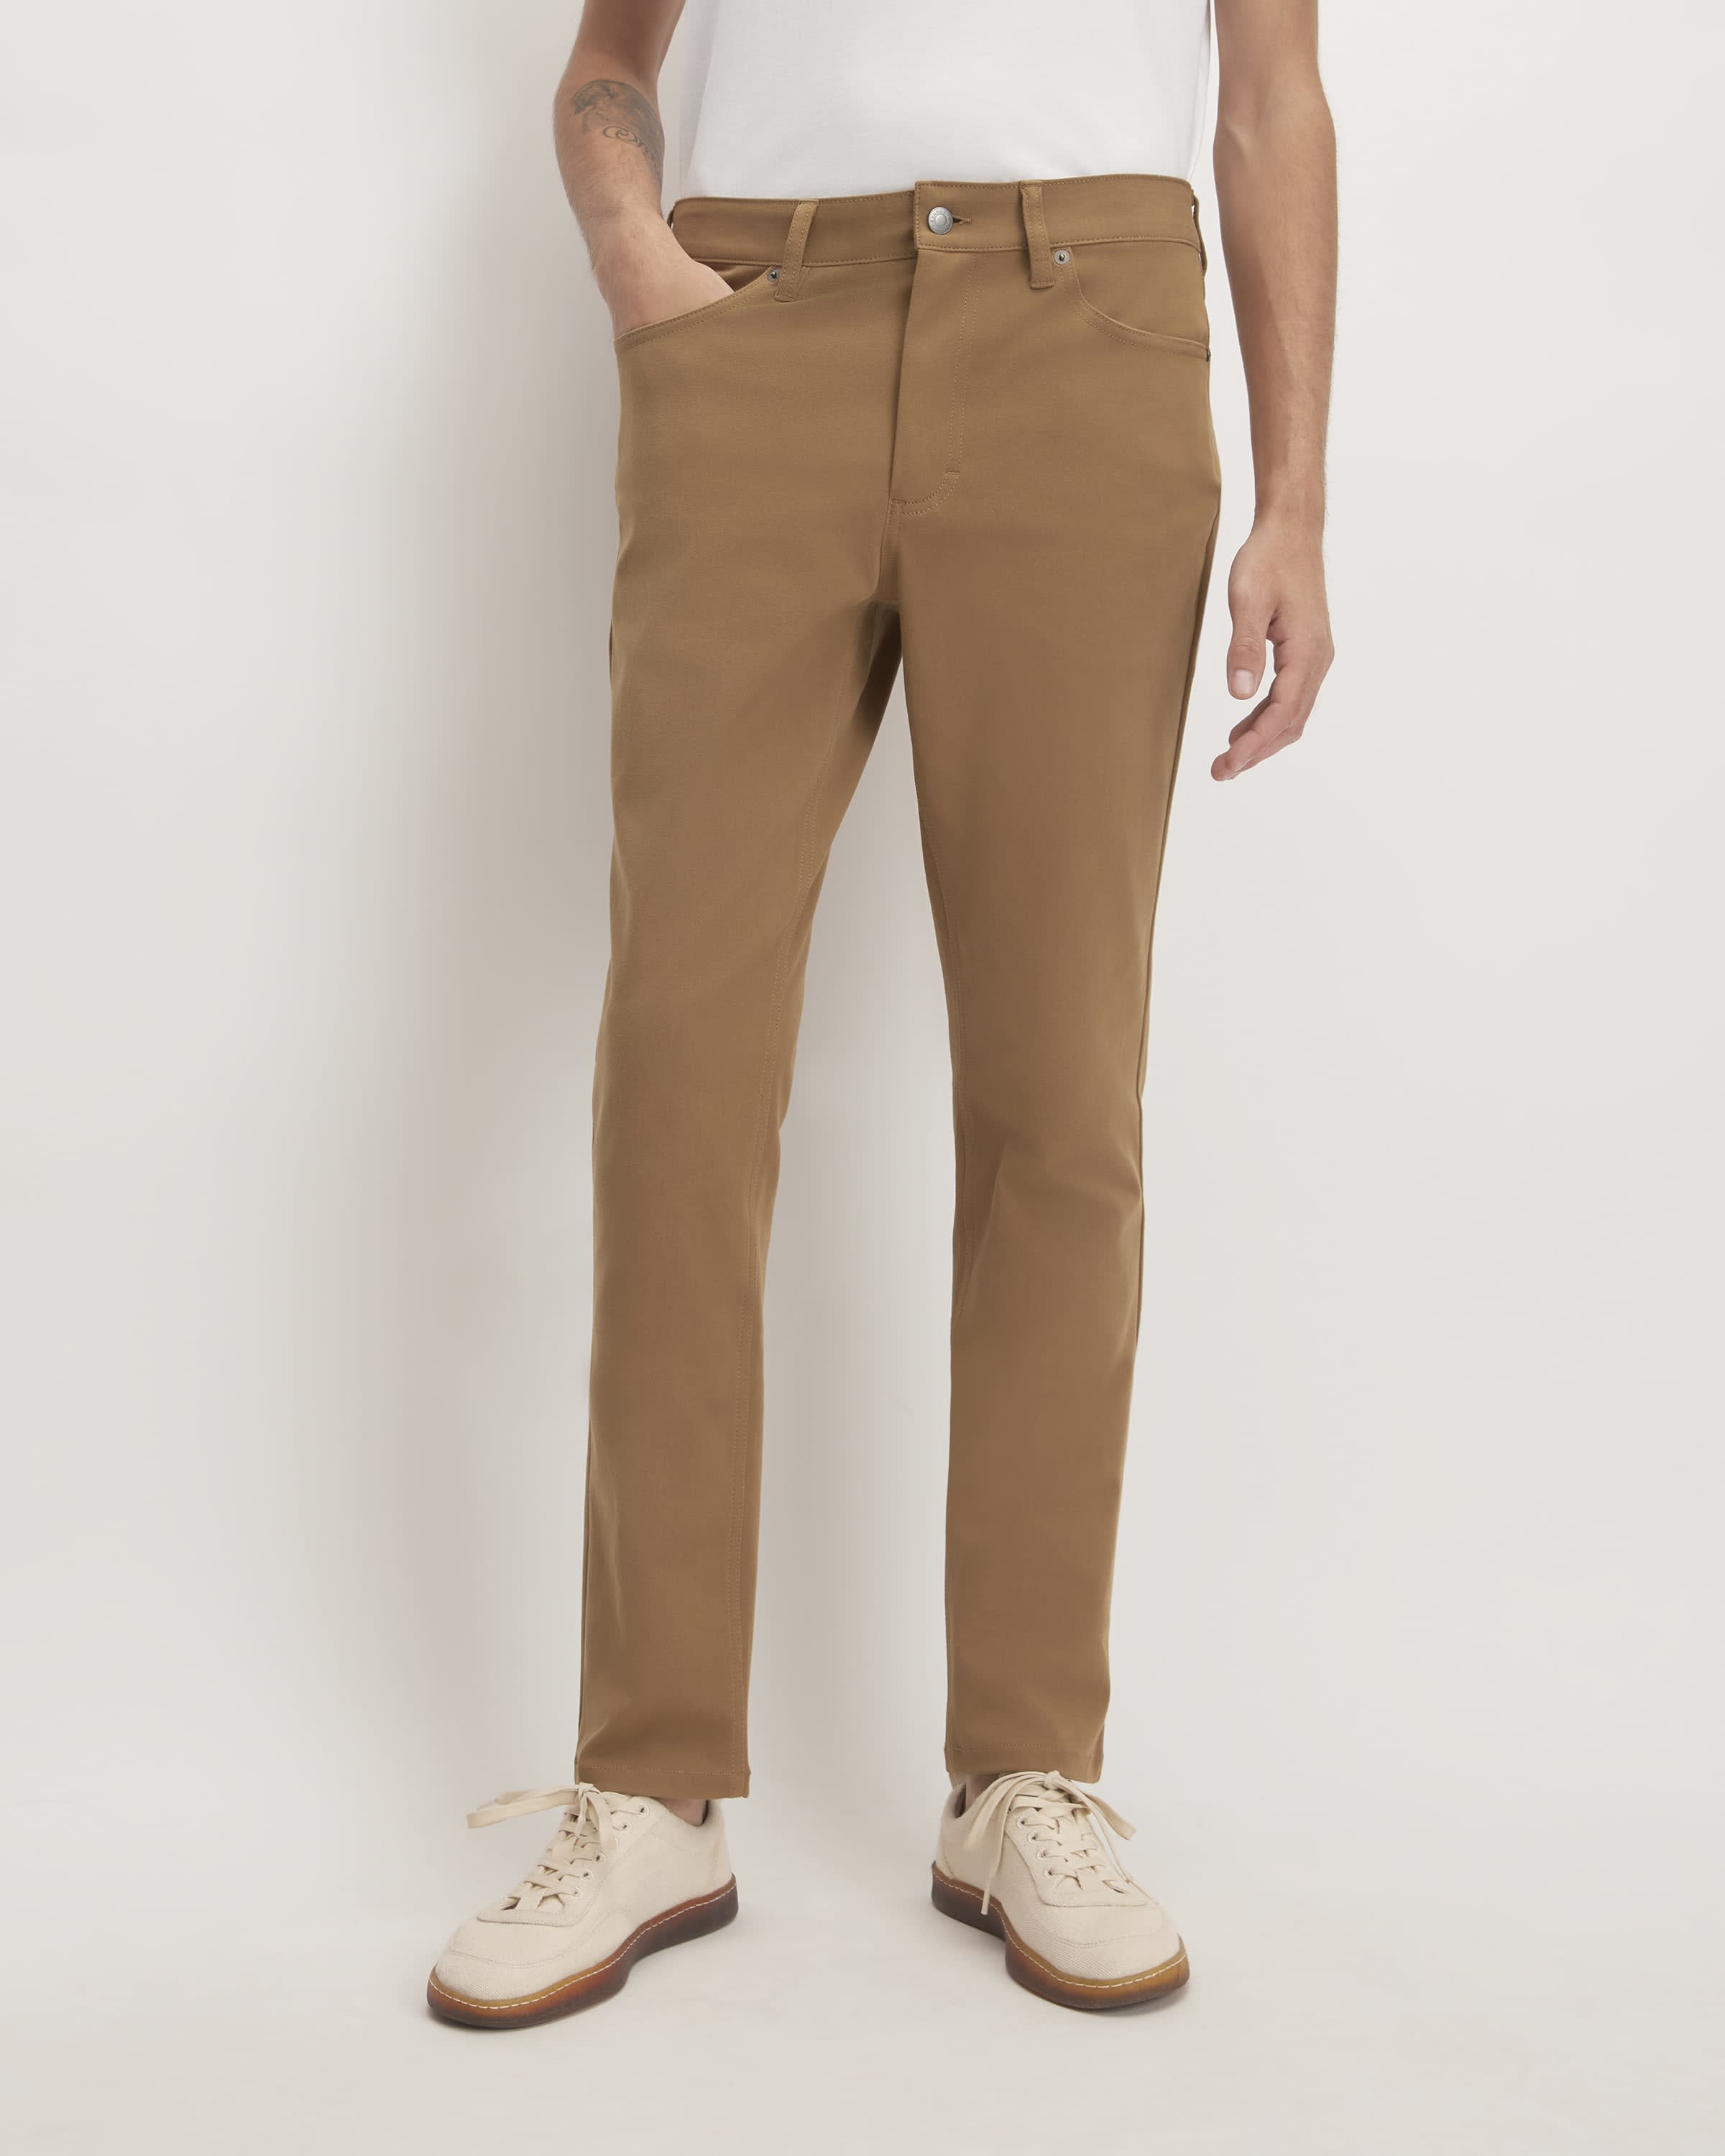 Buy Plus Size Chinos & Chino Pants For Guys - Apella